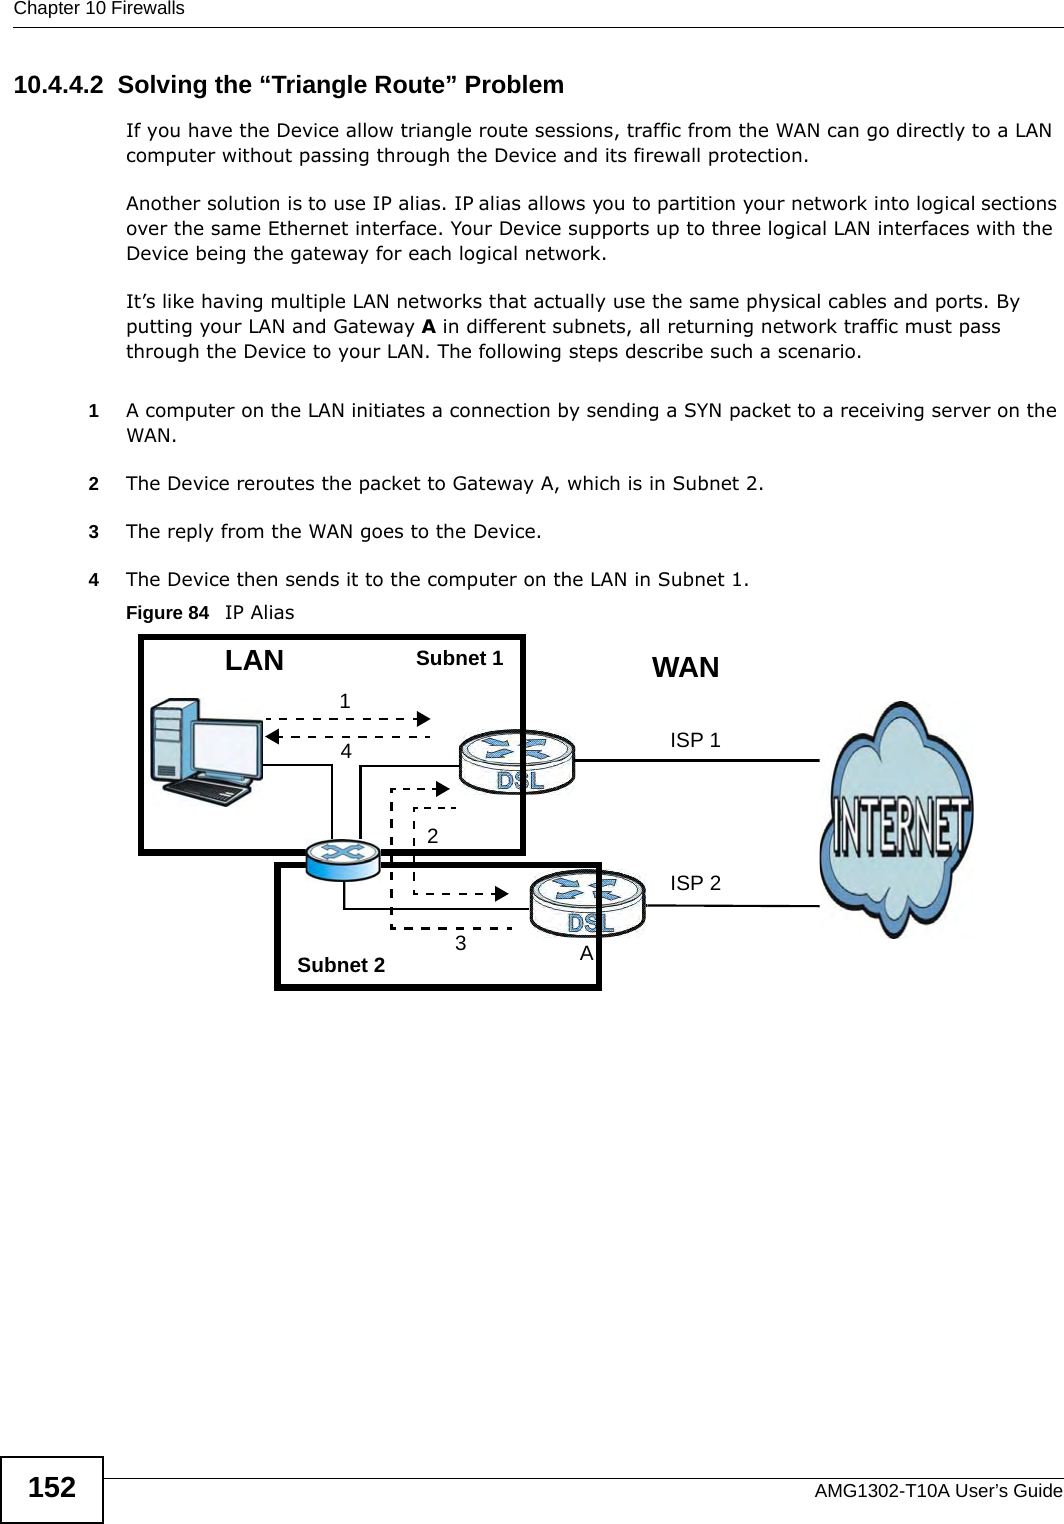 Chapter 10 FirewallsAMG1302-T10A User’s Guide15210.4.4.2  Solving the “Triangle Route” ProblemIf you have the Device allow triangle route sessions, traffic from the WAN can go directly to a LAN computer without passing through the Device and its firewall protection. Another solution is to use IP alias. IP alias allows you to partition your network into logical sections over the same Ethernet interface. Your Device supports up to three logical LAN interfaces with the Device being the gateway for each logical network. It’s like having multiple LAN networks that actually use the same physical cables and ports. By putting your LAN and Gateway A in different subnets, all returning network traffic must pass through the Device to your LAN. The following steps describe such a scenario.1A computer on the LAN initiates a connection by sending a SYN packet to a receiving server on the WAN. 2The Device reroutes the packet to Gateway A, which is in Subnet 2. 3The reply from the WAN goes to the Device. 4The Device then sends it to the computer on the LAN in Subnet 1.Figure 84   IP Alias123LANAISP 1ISP 24WANSubnet 1Subnet 2